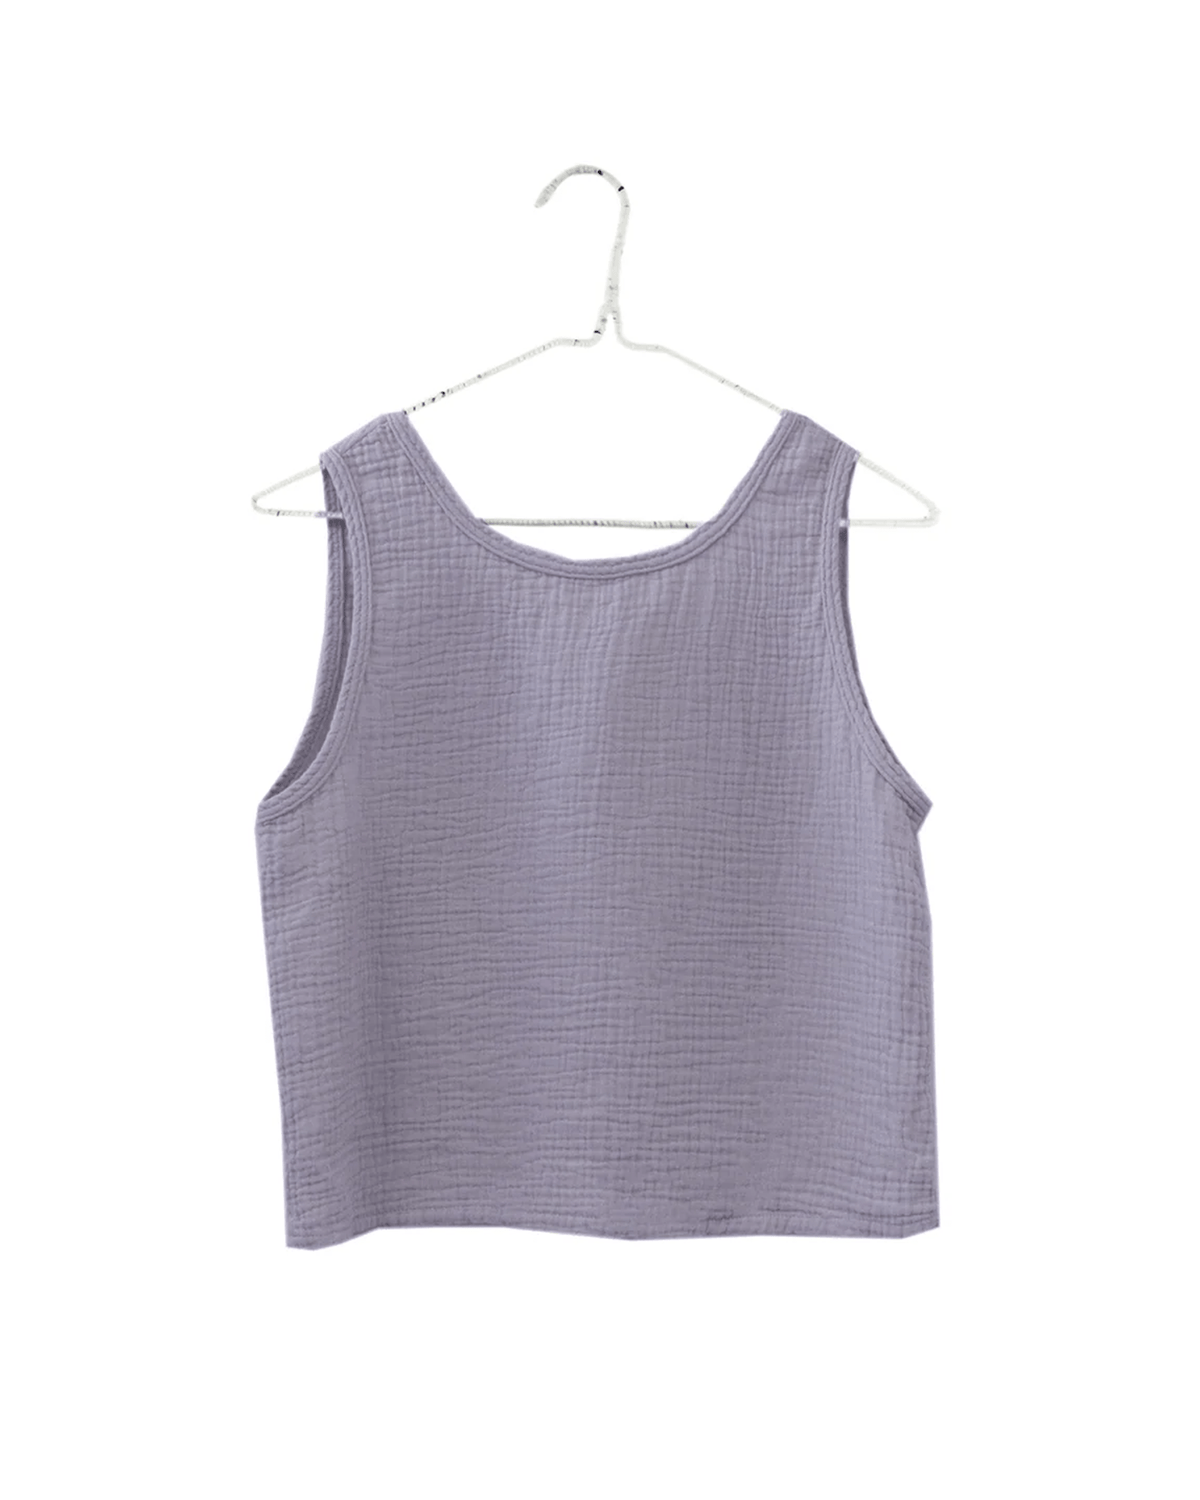 It is well LA Clothing Sleeveless Crop Top in Lavender